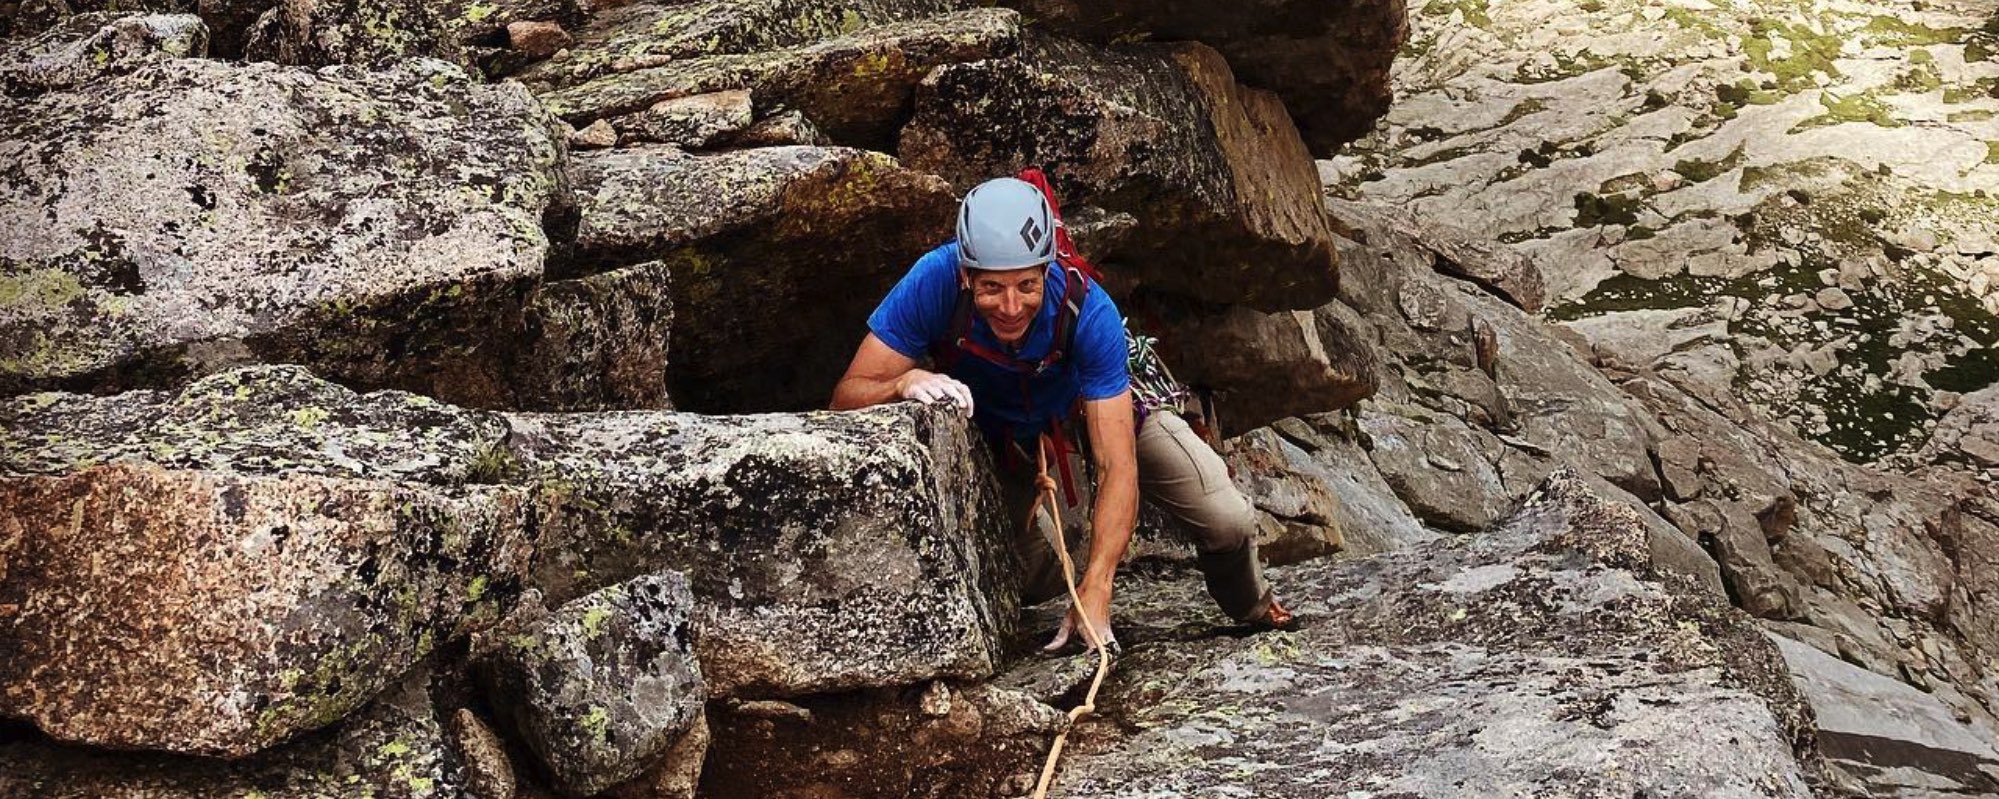 In this captivating photo, a rock climber fearlessly scales a rock with the aid of a rope, harness, and helmet. Despite the challenge, a confident smile graces his face, portraying the joy and ease he finds in conquering the ascent. This image encapsulates the thrill of rock climbing, blending adventure and a sense of accomplishment against the rugged backdrop of the climbing environment.